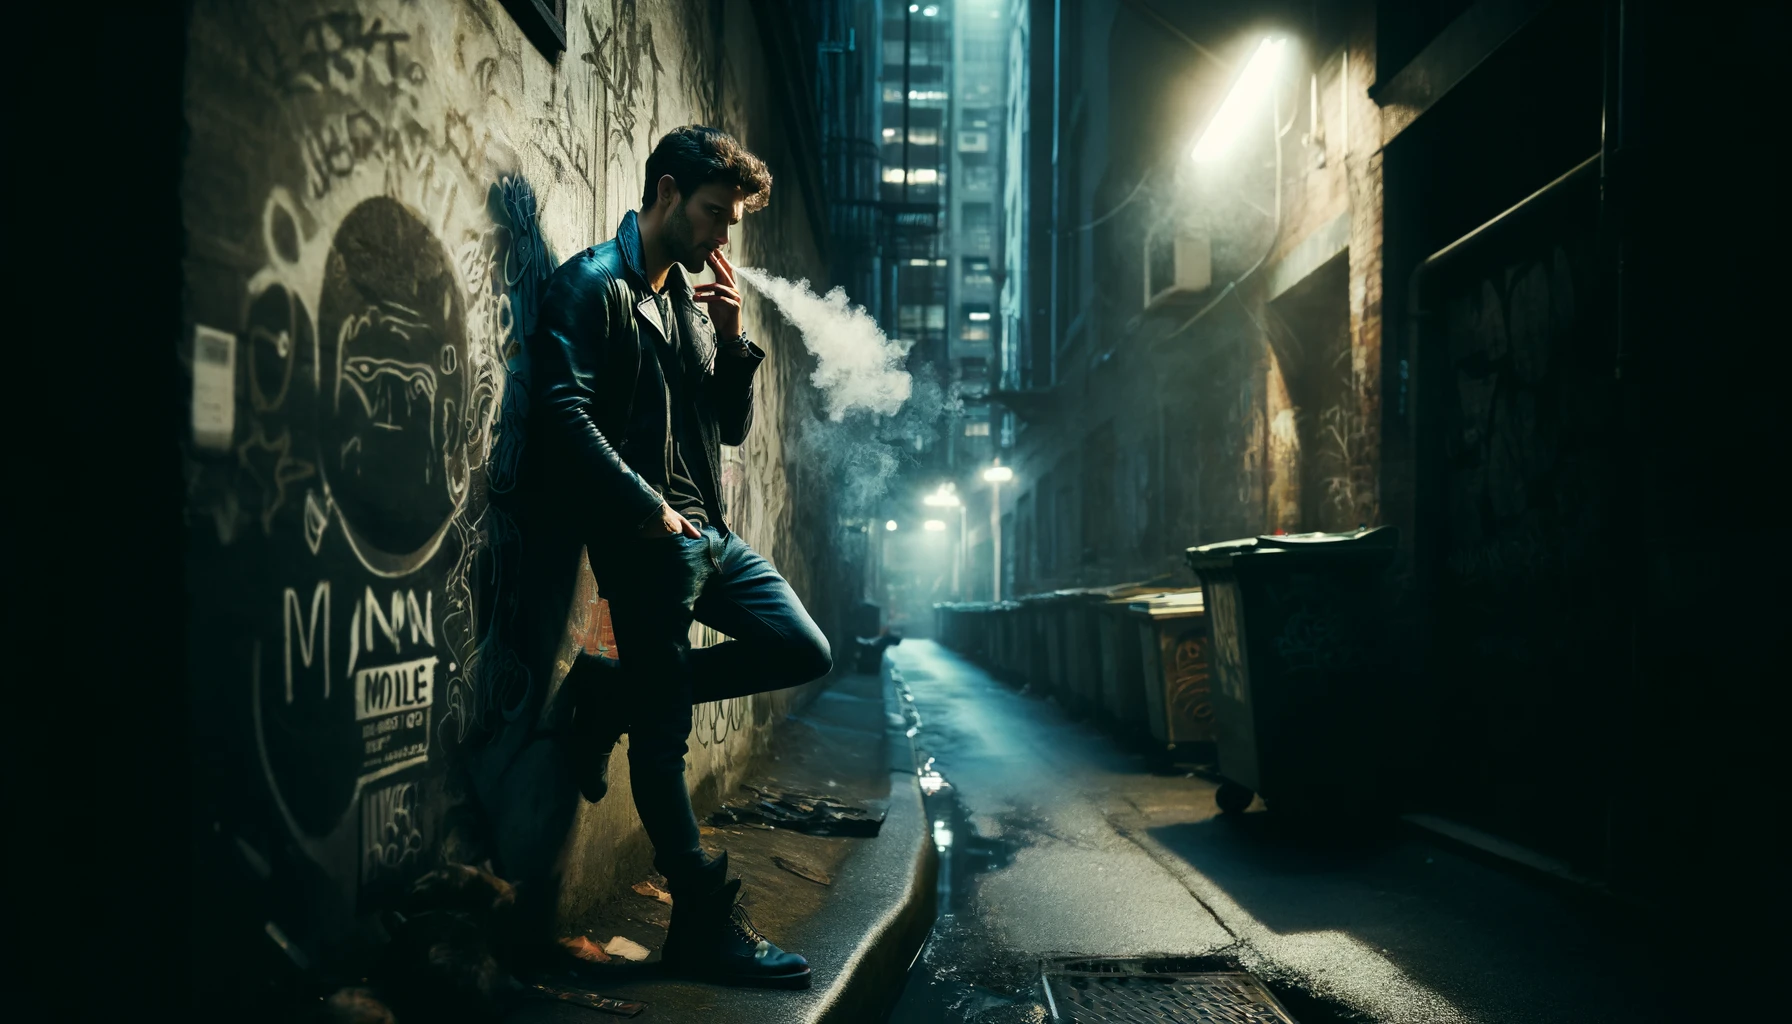 A man wearing a dark leather jacket and jeans, leaning against a graffiti-covered wall in a dimly lit alley. He is smoking a cigarette, with smoke curling up into the air. The alley is narrow and filled with trash and a few stray cats. The lighting is moody, with a single flickering street lamp casting shadows. The atmosphere is gritty and urban, reminiscent of a noir film.